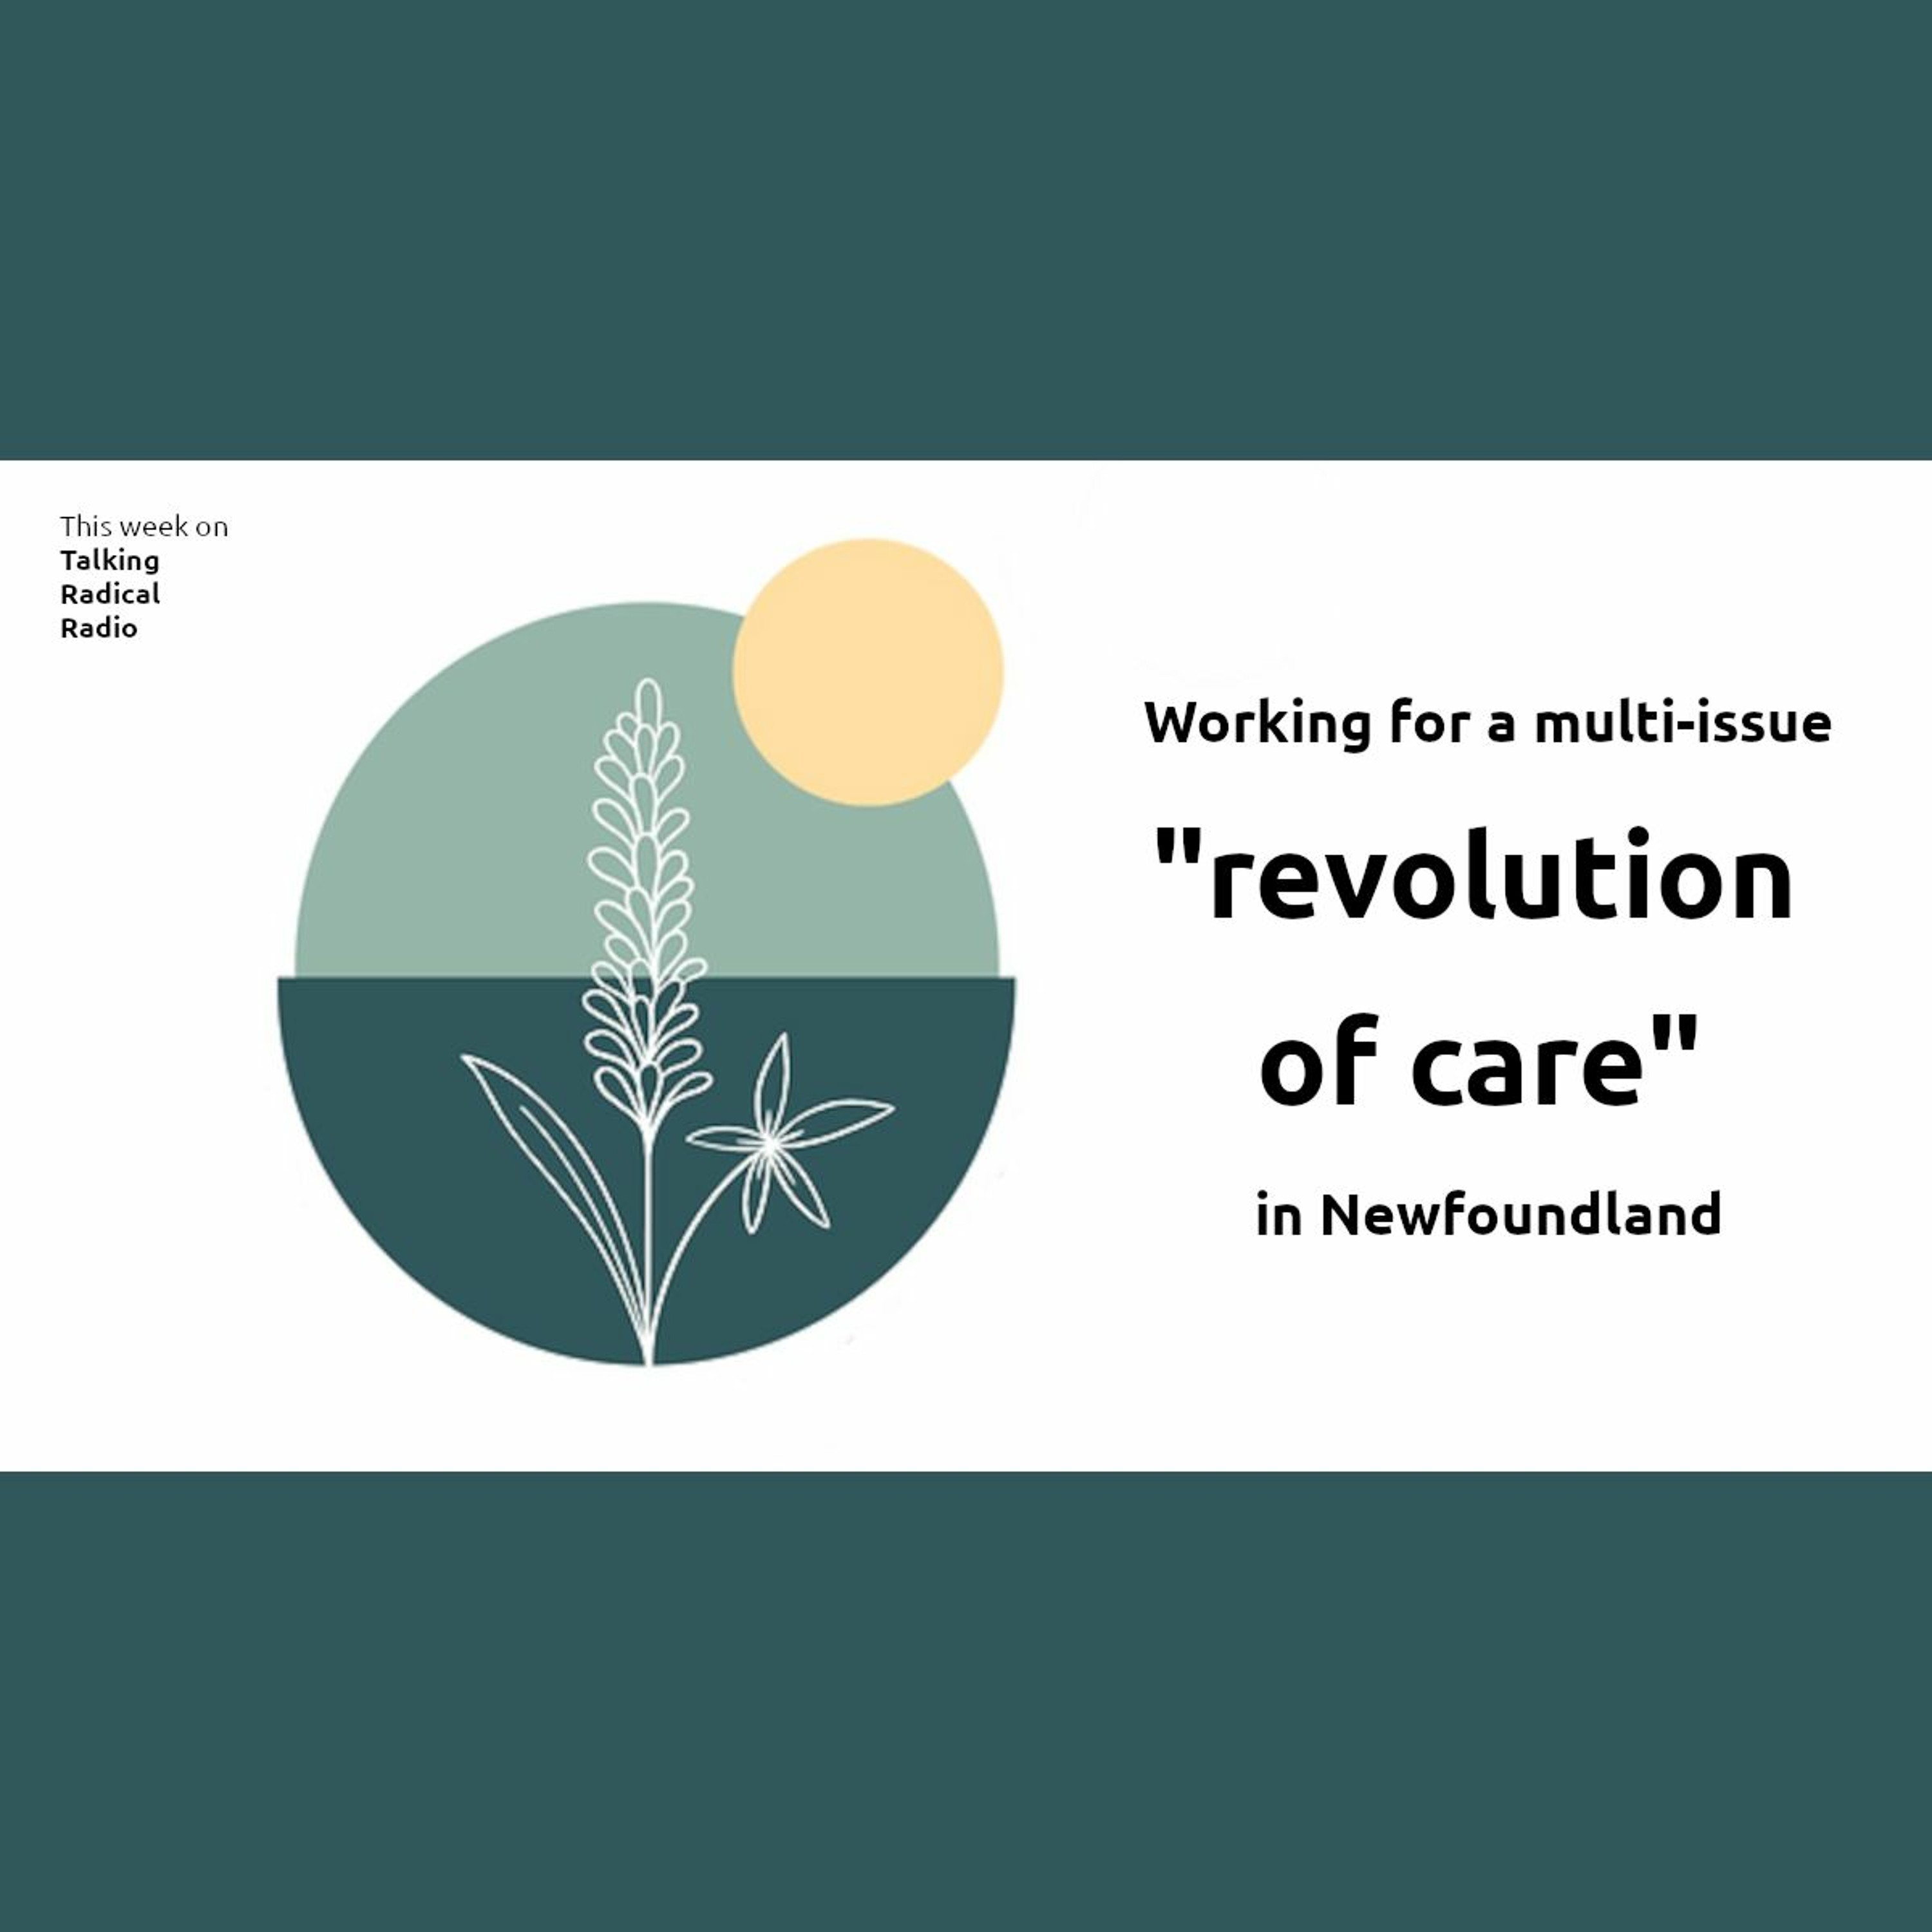 Working for a multi-issue "revolution of care" in Newfoundland